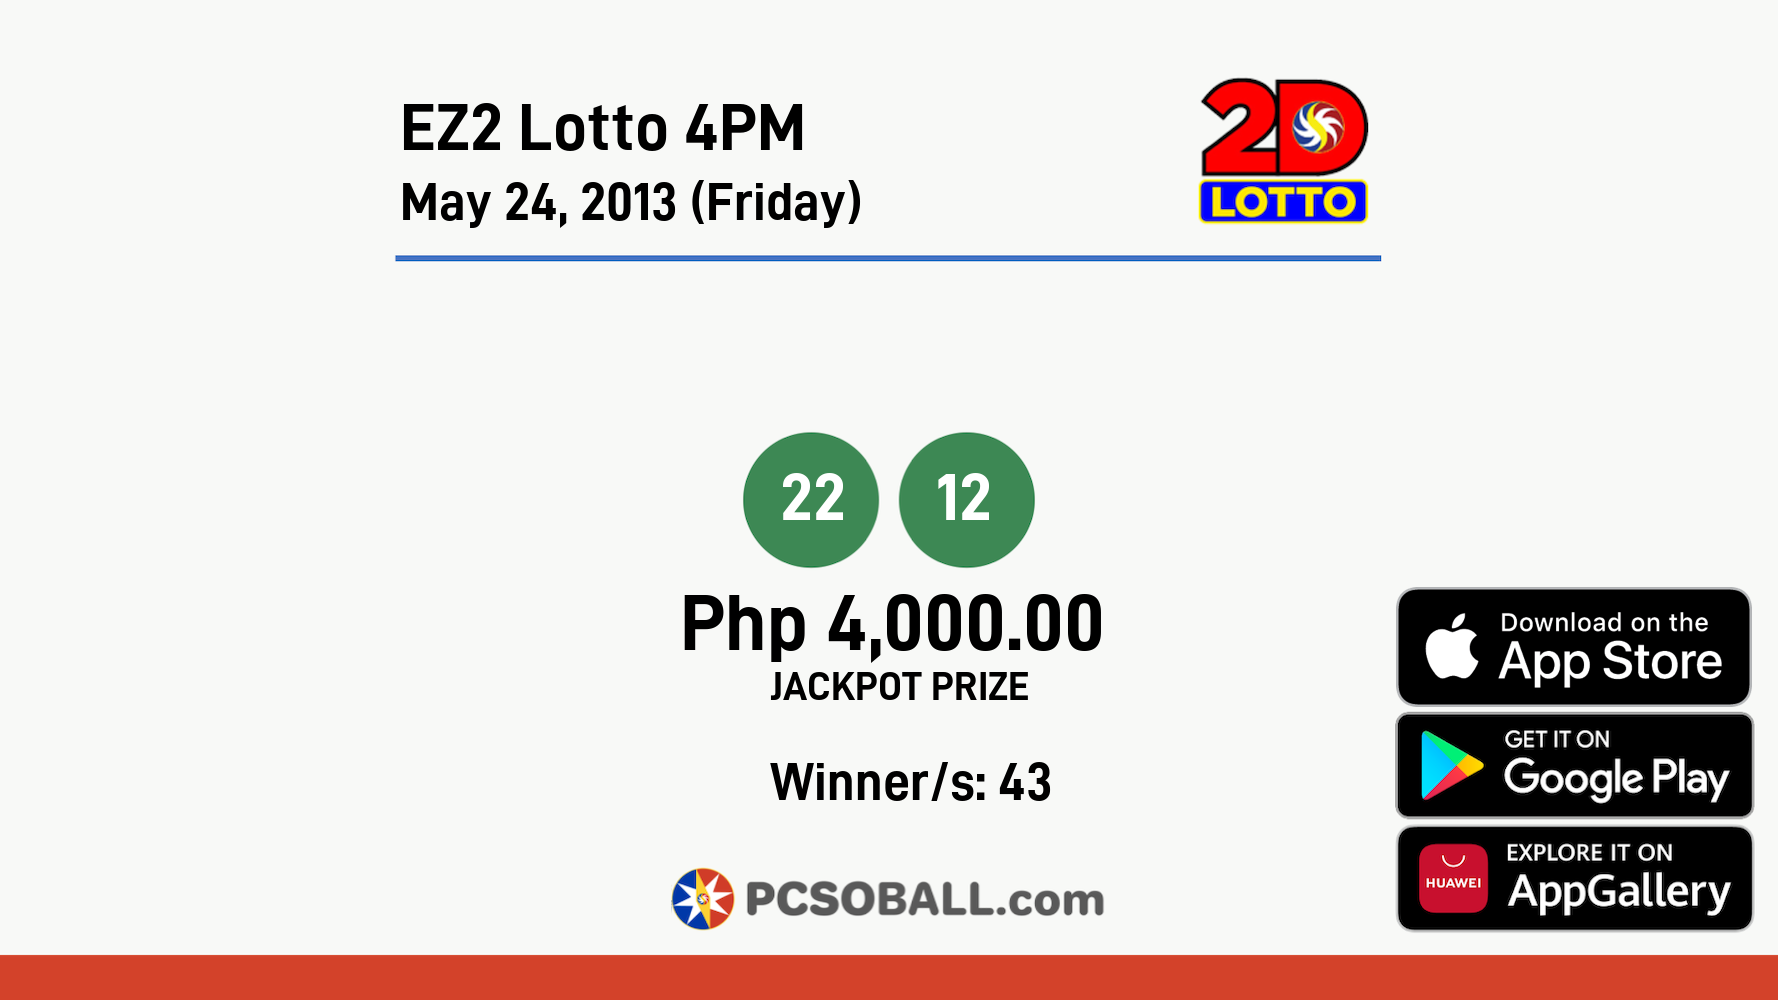 EZ2 Lotto 4PM May 24, 2013 (Friday) Result